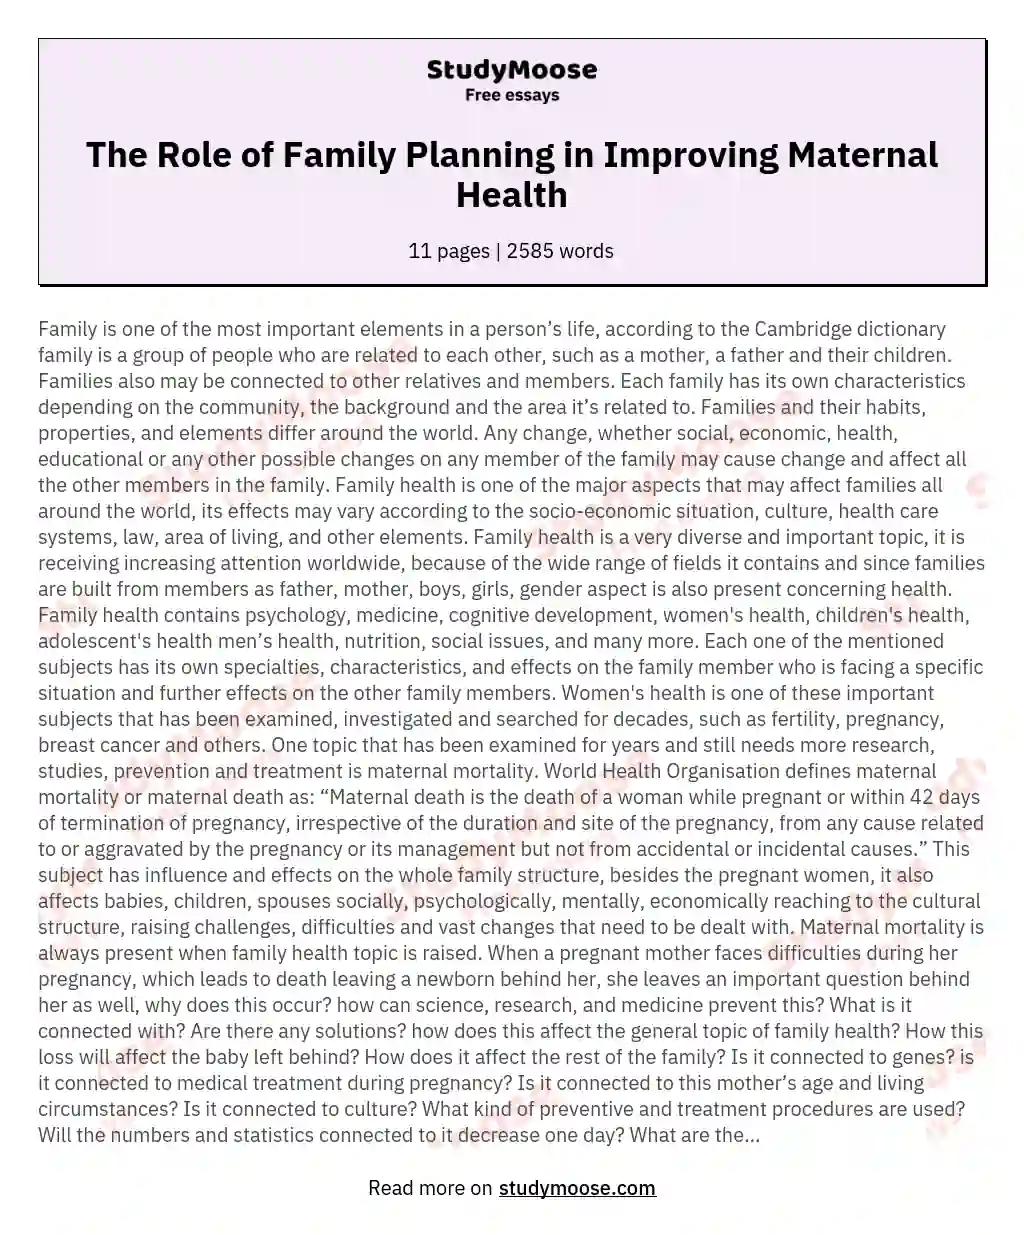 The Role of Family Planning in Improving Maternal Health essay